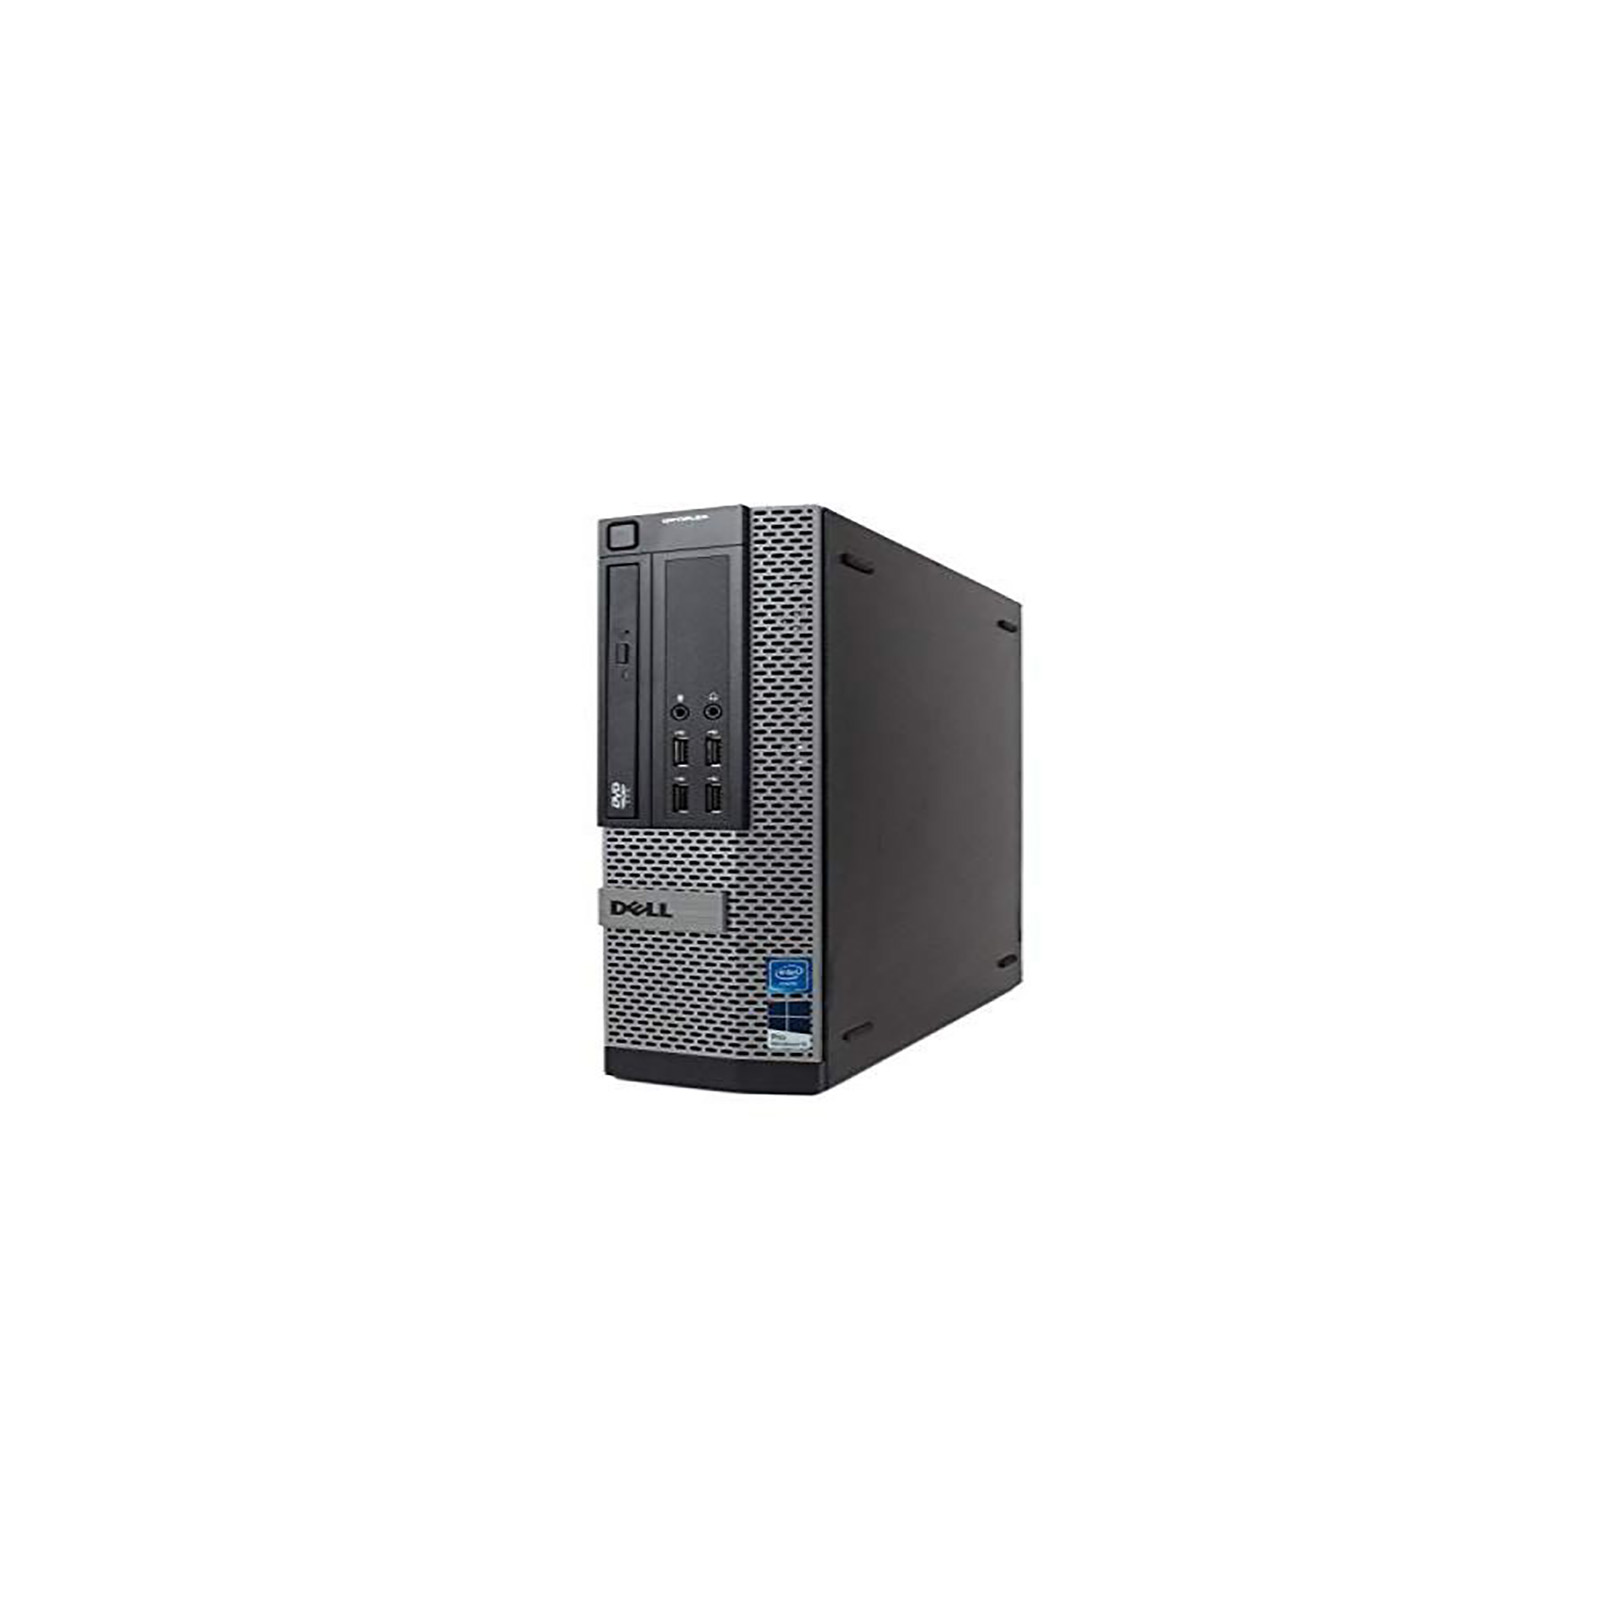 Dell (Renewed)  Optiplex 7010 Desktop Computer - Intel Core i7 Up to 3.8GHz Max Turbo Frequency, 16GB DDR3, New 1TB SSD,